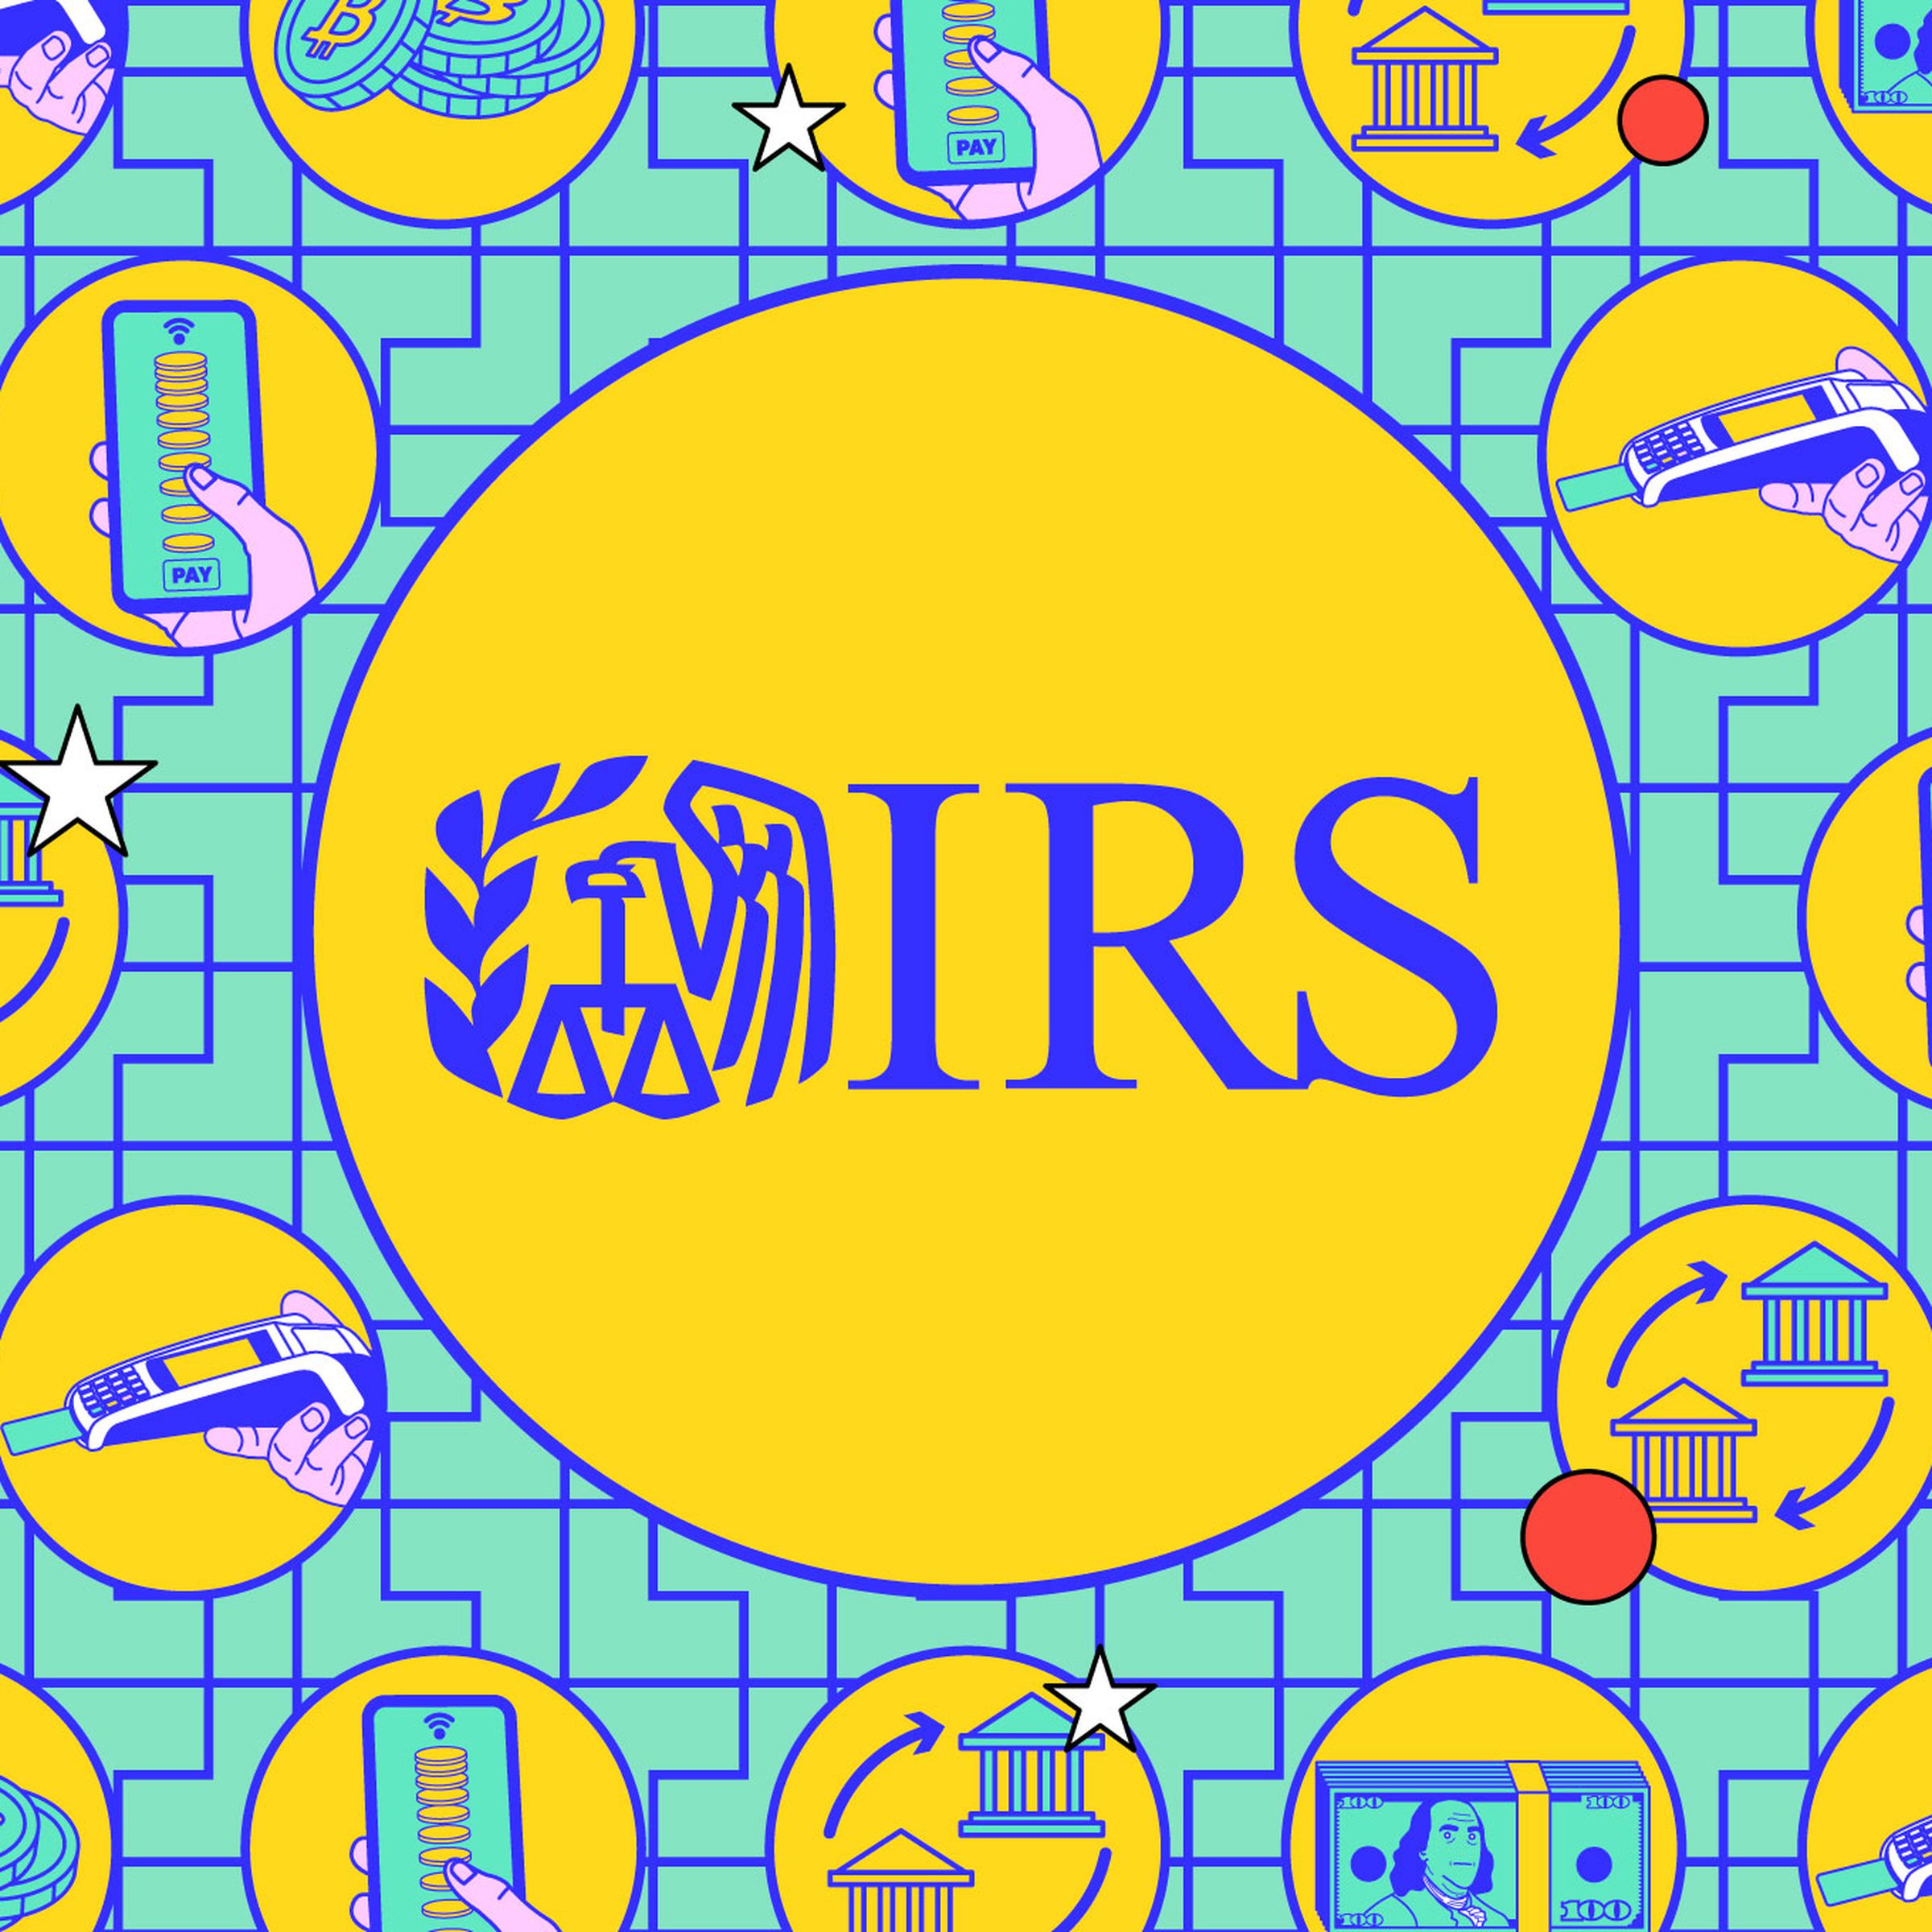 Colorful image of the IRS logo with several small images surrounded by smartphones and financial-themed drawings.